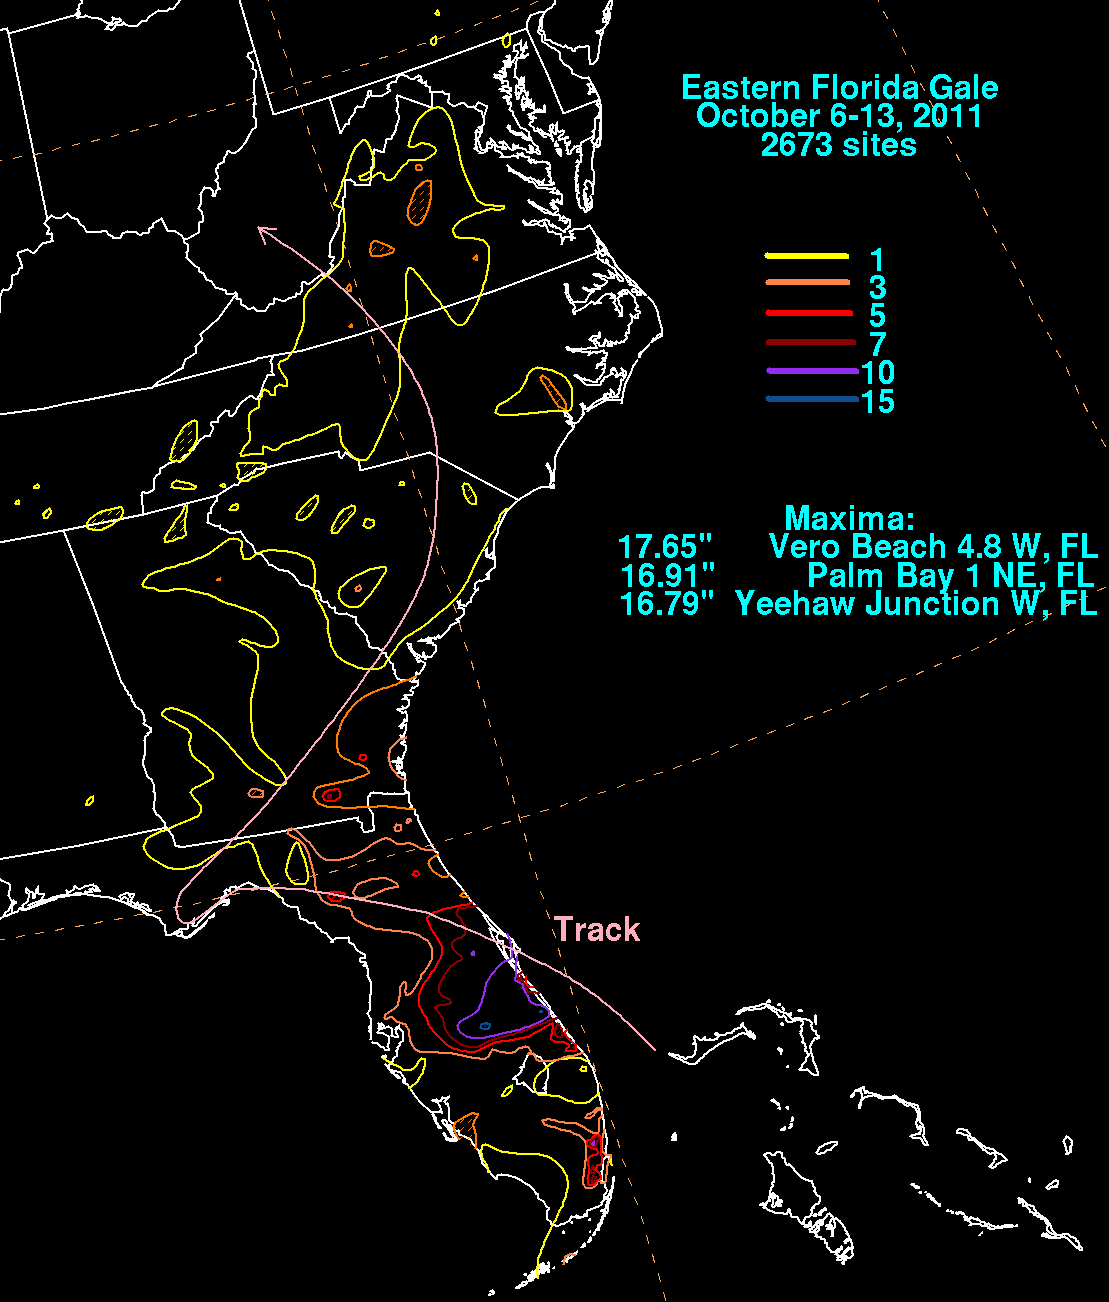 Early October 2011 Florida Gale Rainfall